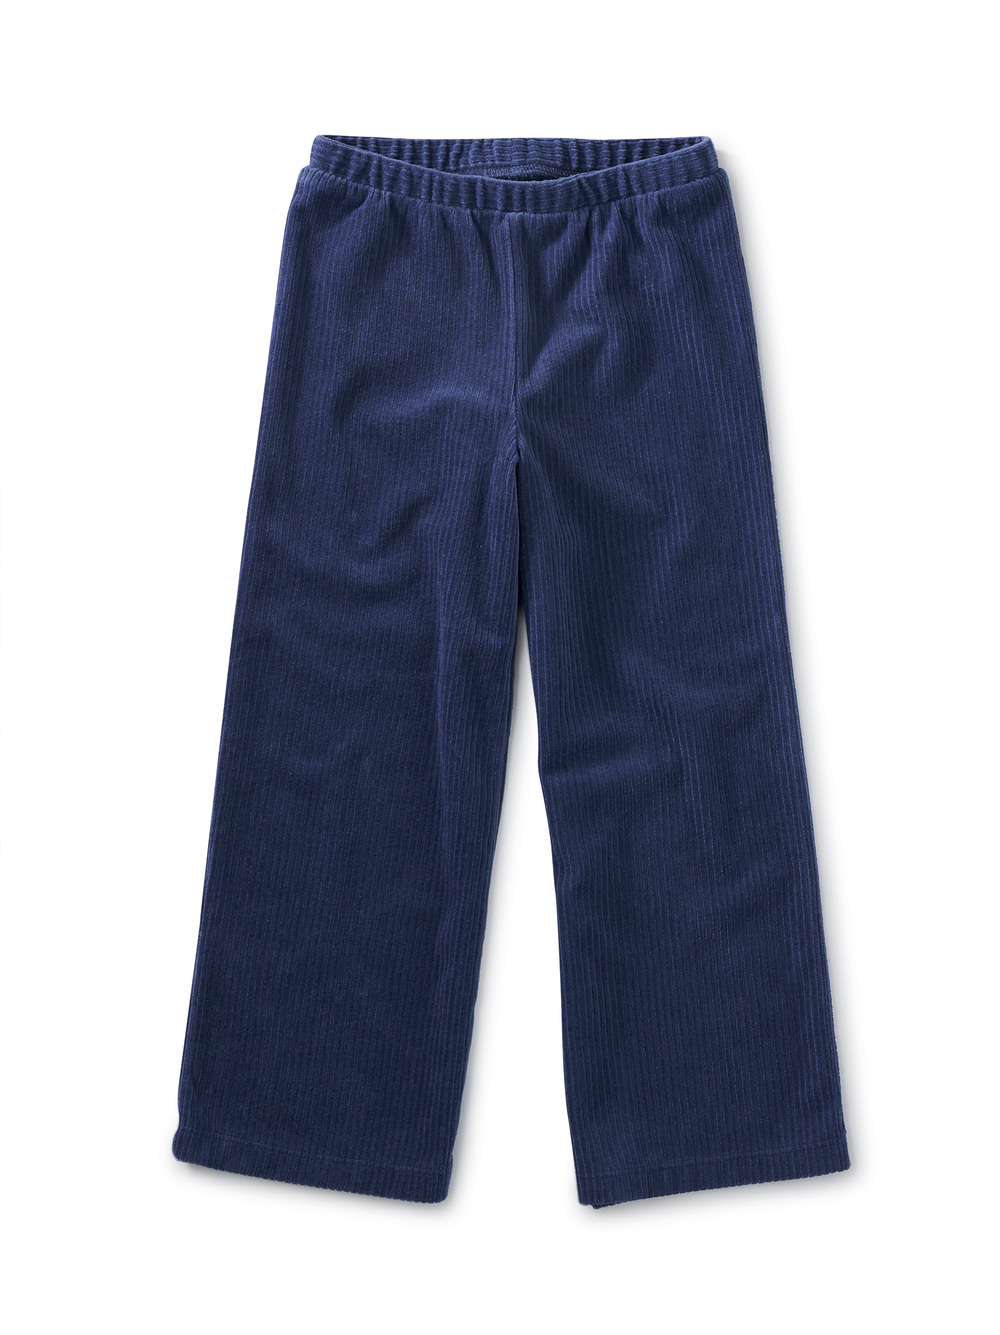 Flare for Fun Velour Pants